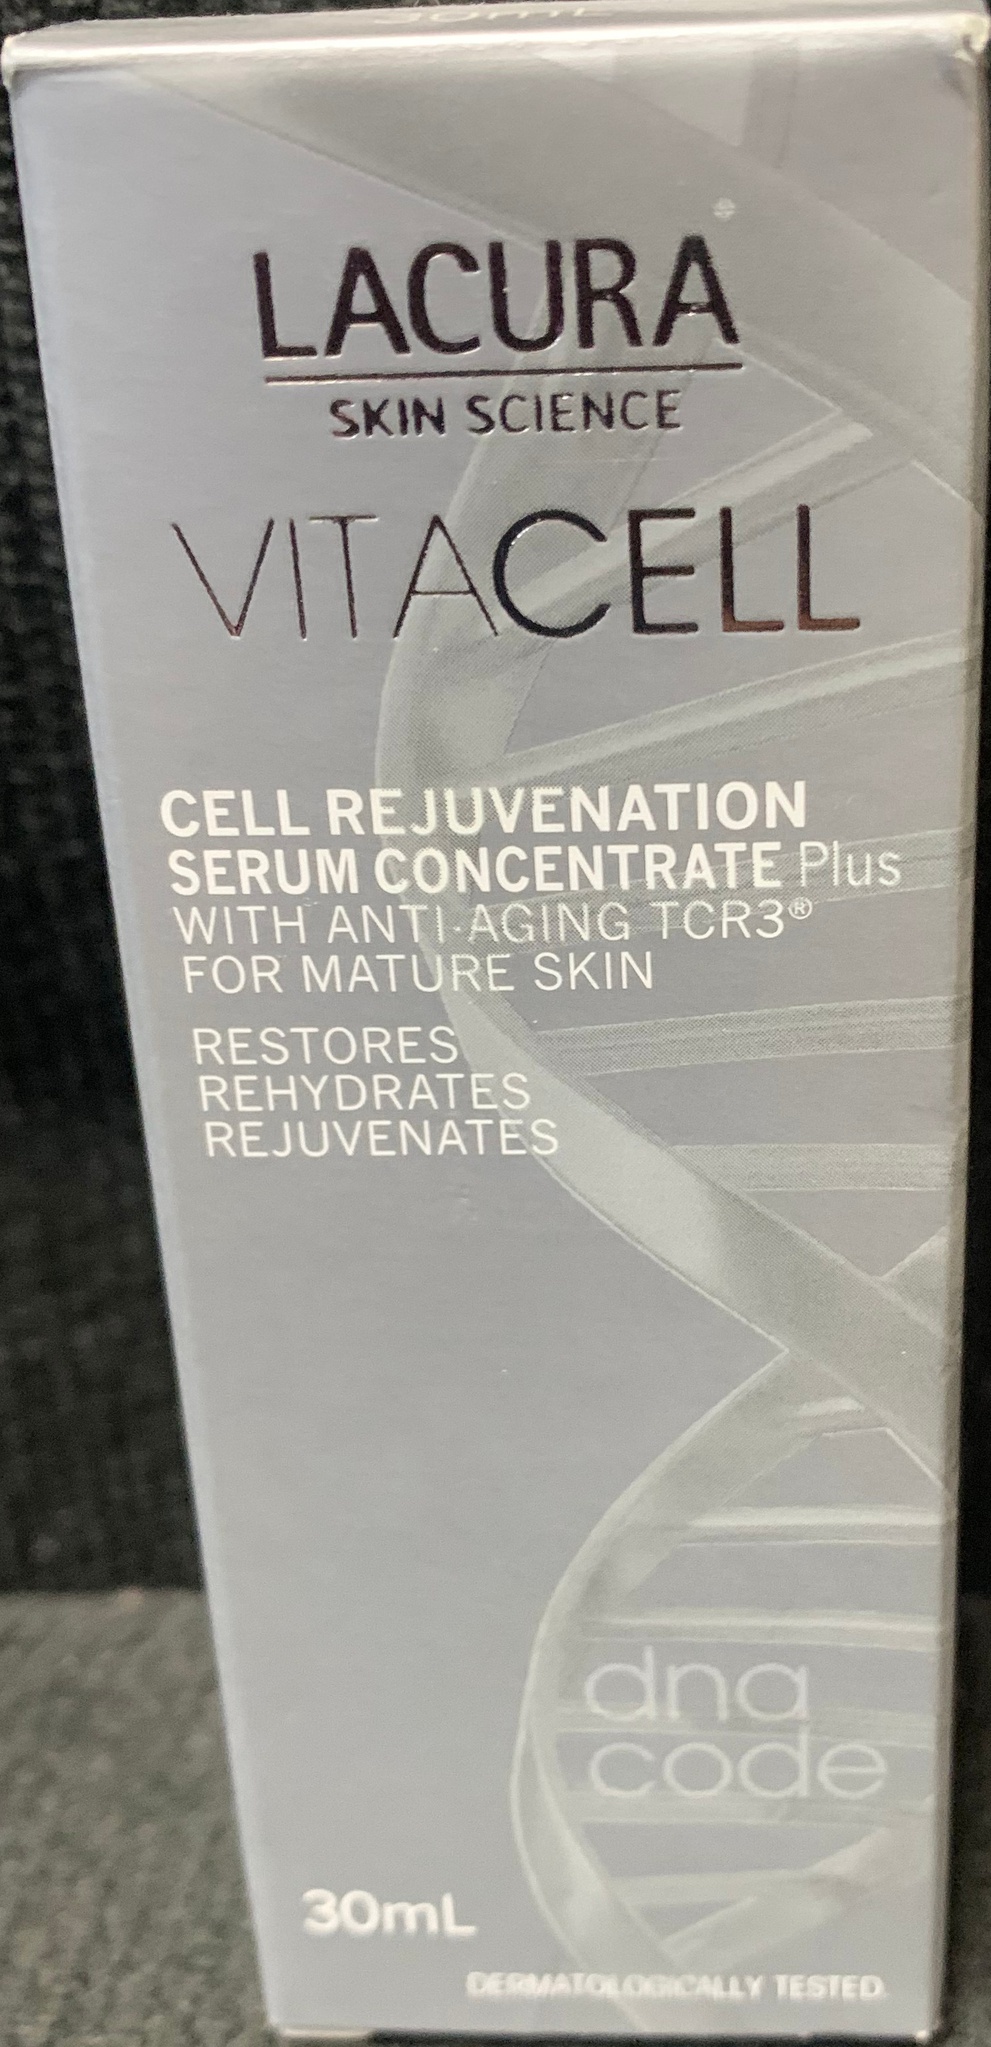 LACURA Vitacell Cell Rejuvenation Serum Concentrate Plus For Mature Skin